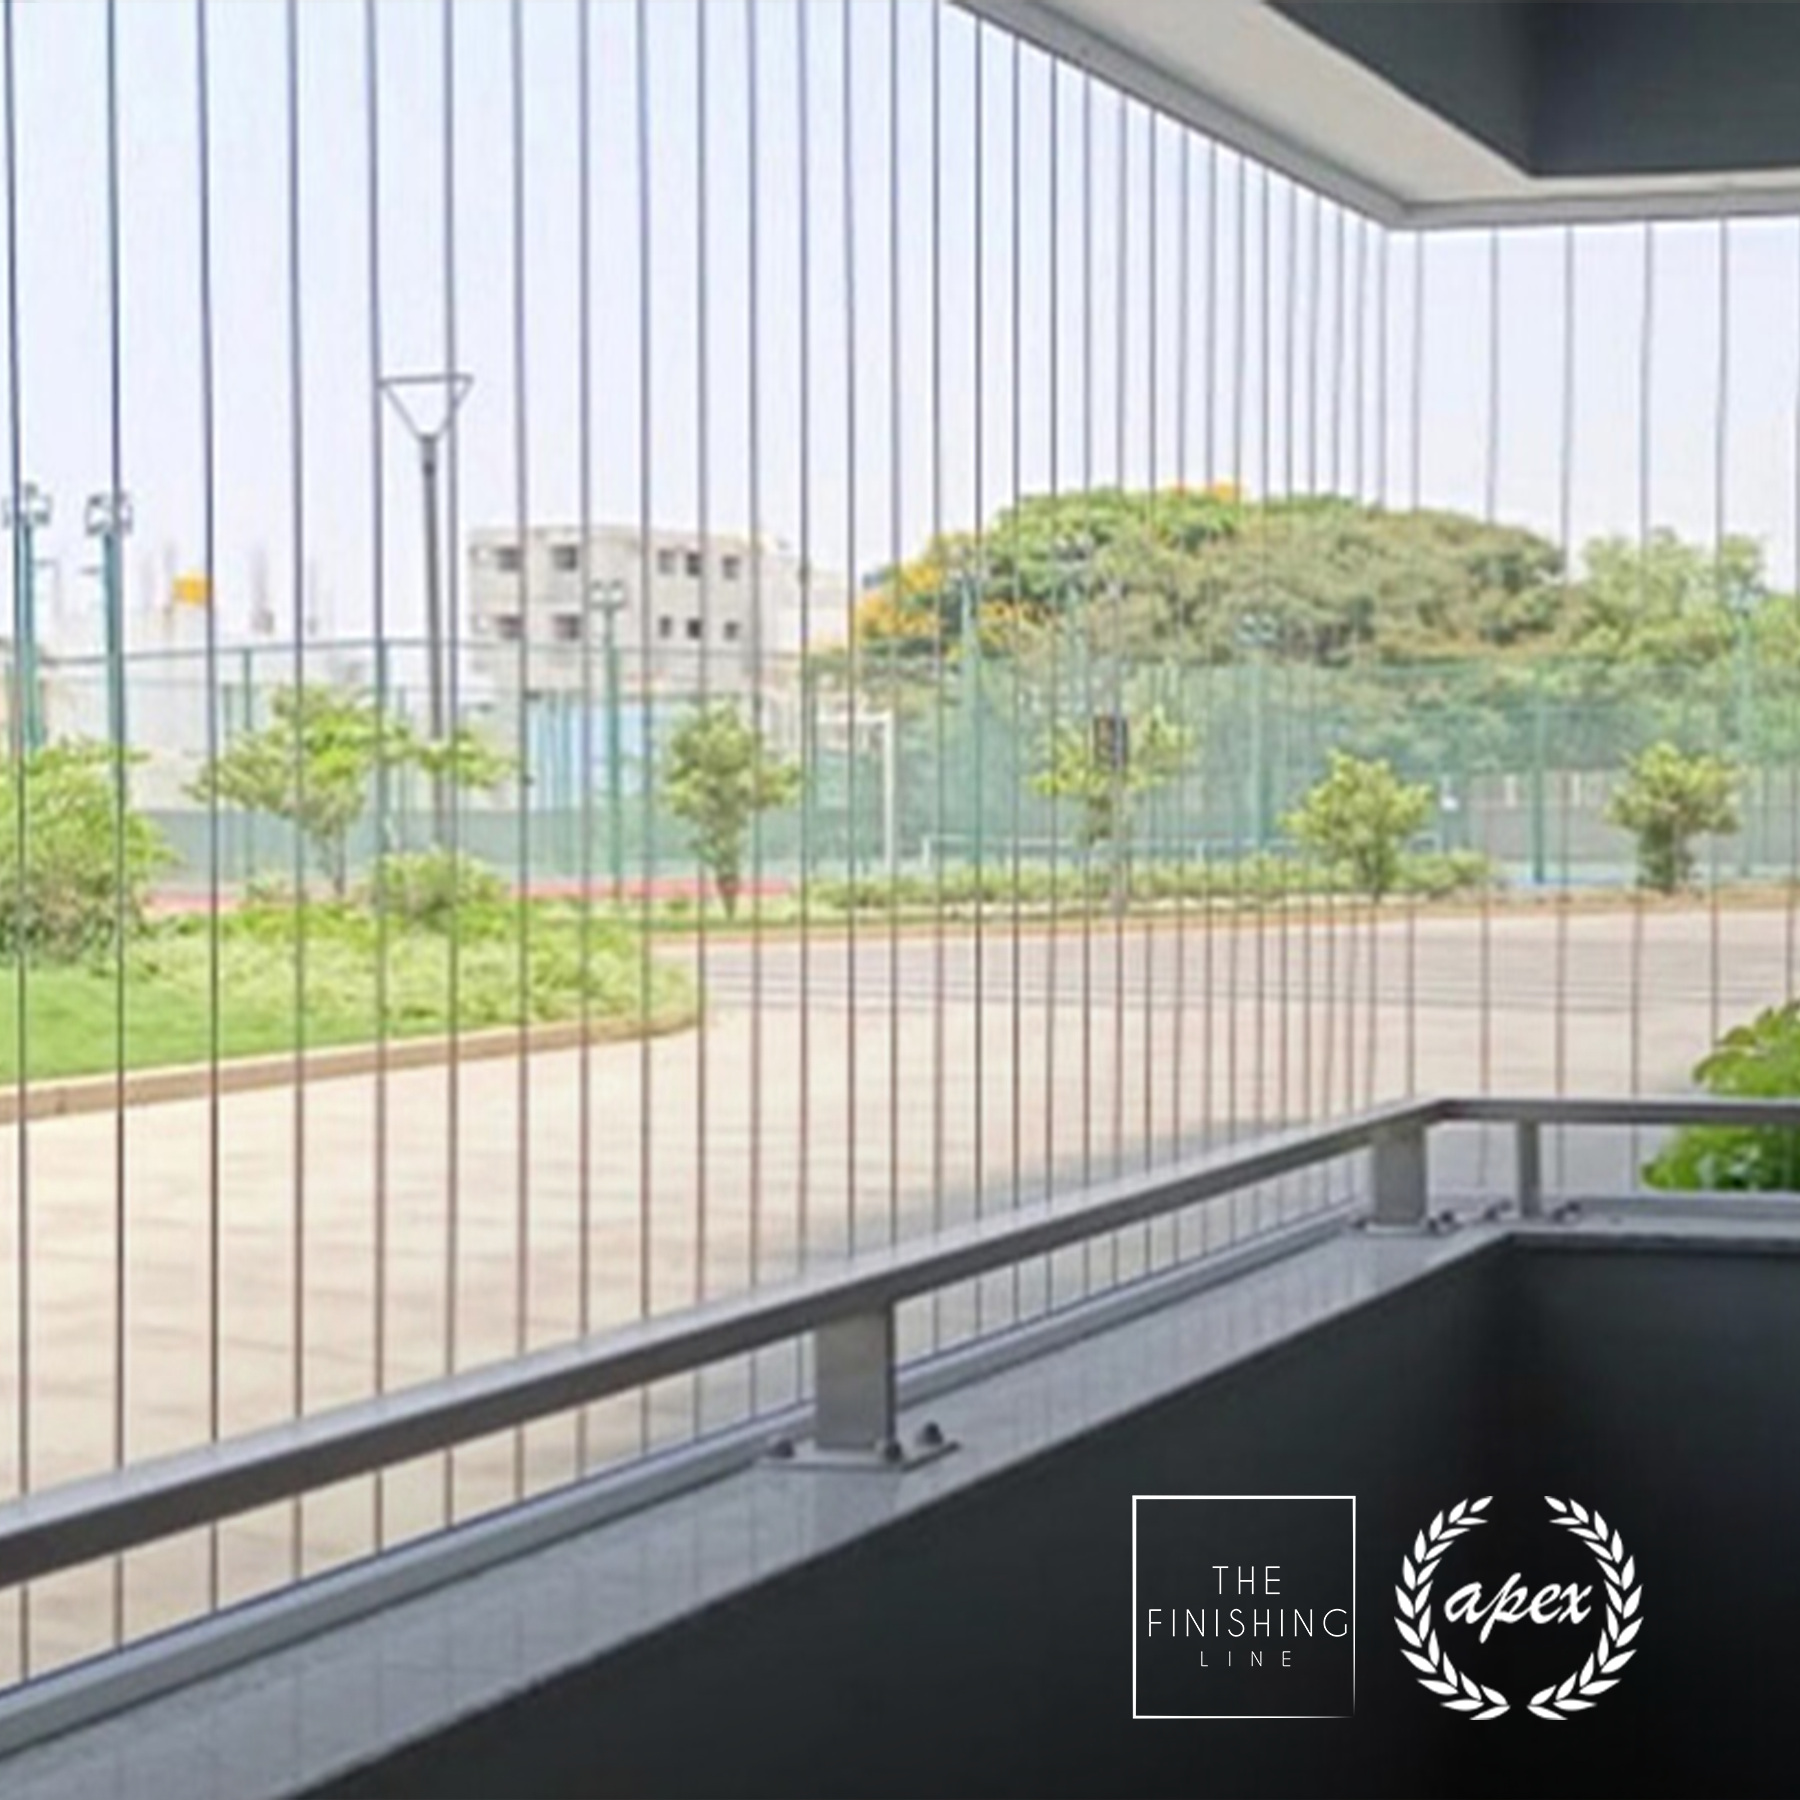 The Balcony Invisible Grille is a nearly invisible, high-grade stainless steel grating system